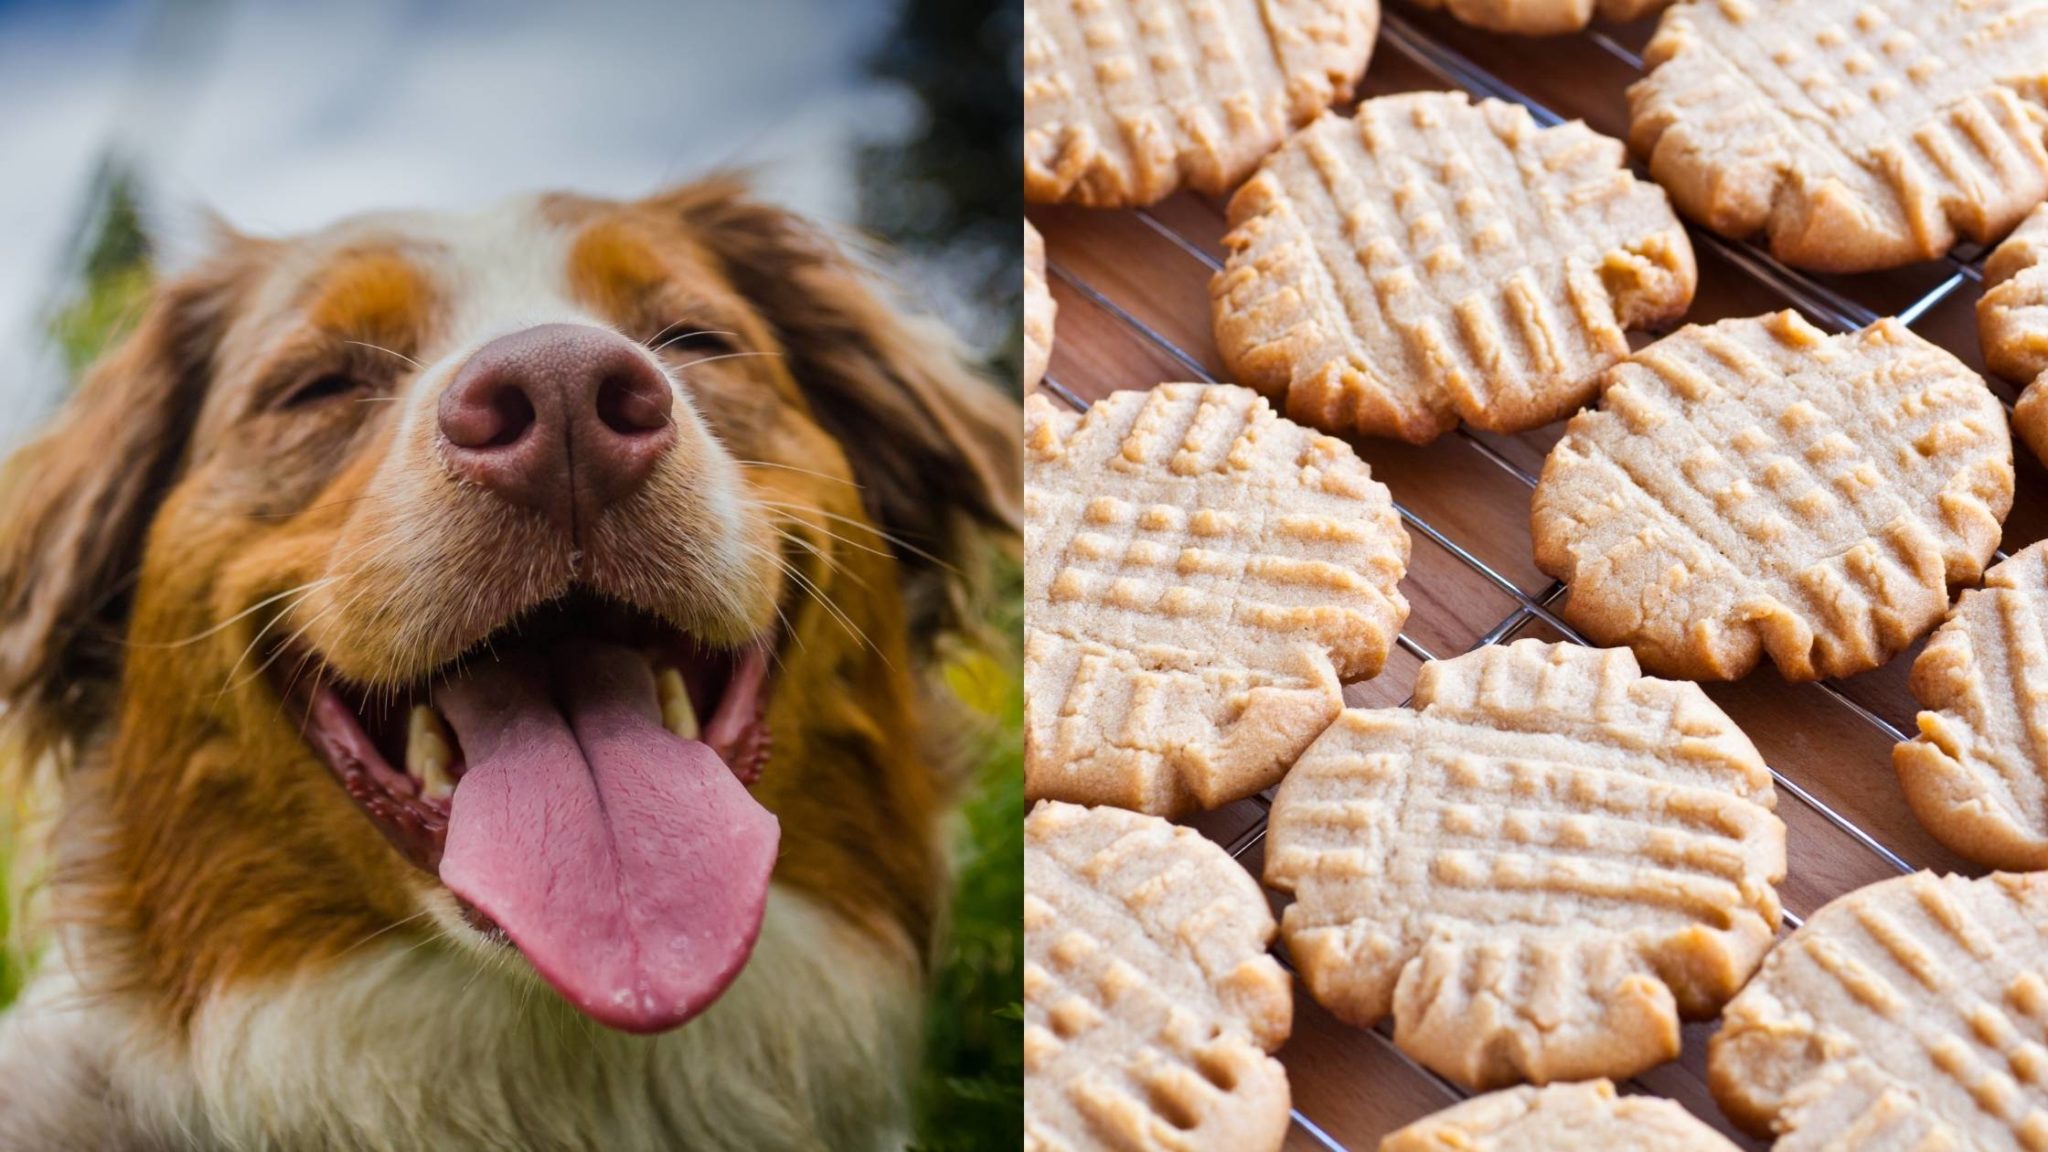 Can dogs Eat Peanut Butter Cookies? Are There Any Risks?